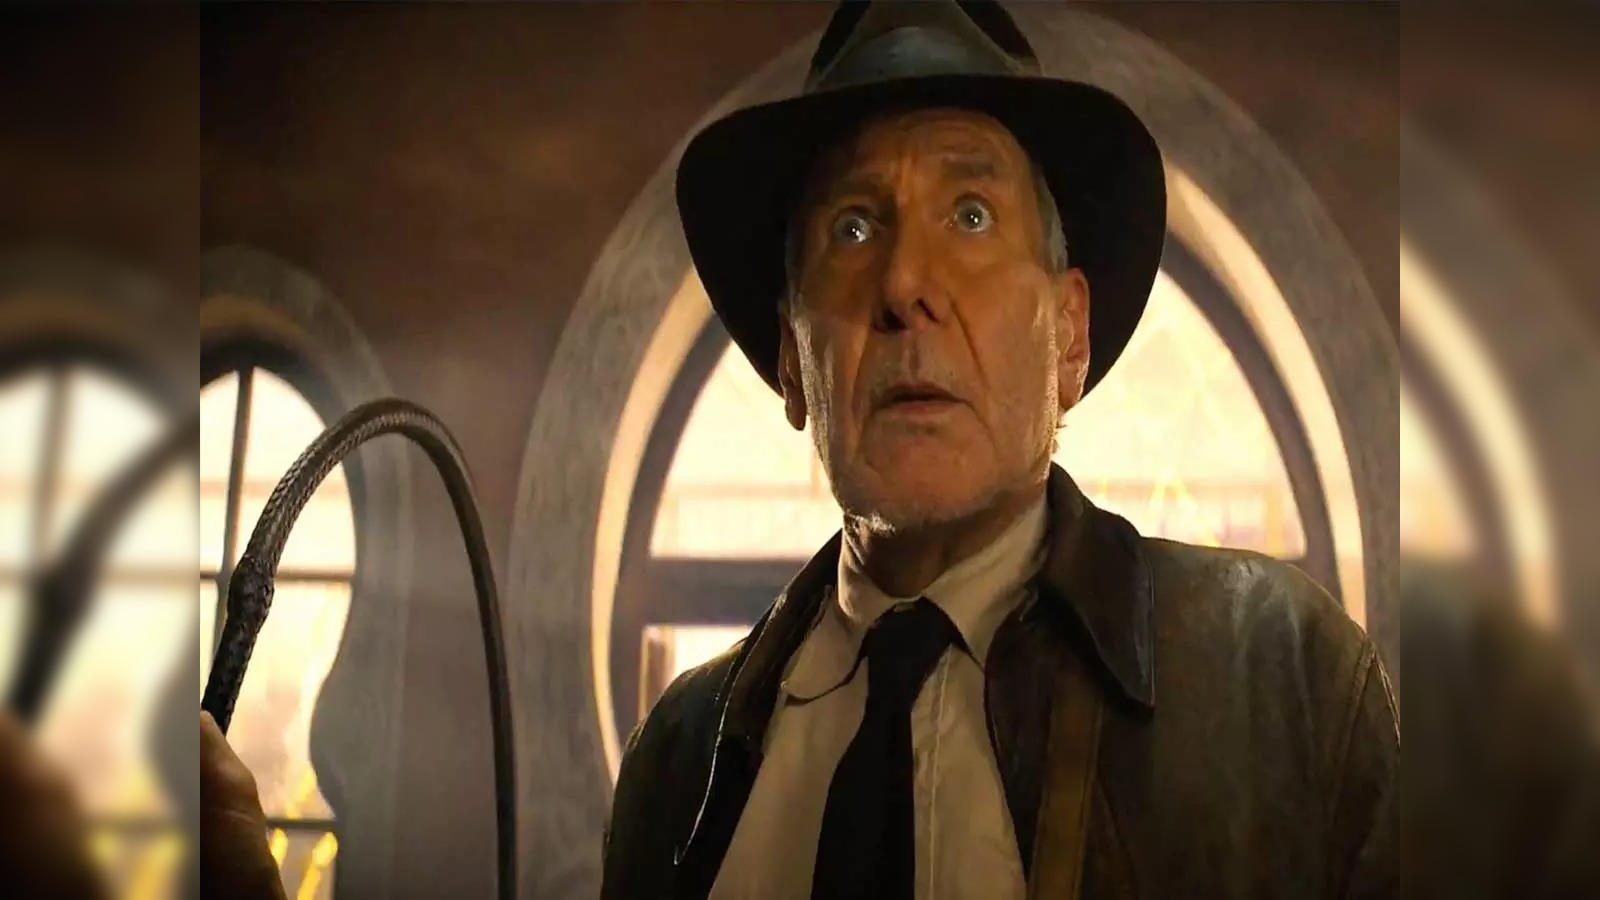 Indiana Jones 5' Streaming on Disney Plus: Release Date and Time - CNET